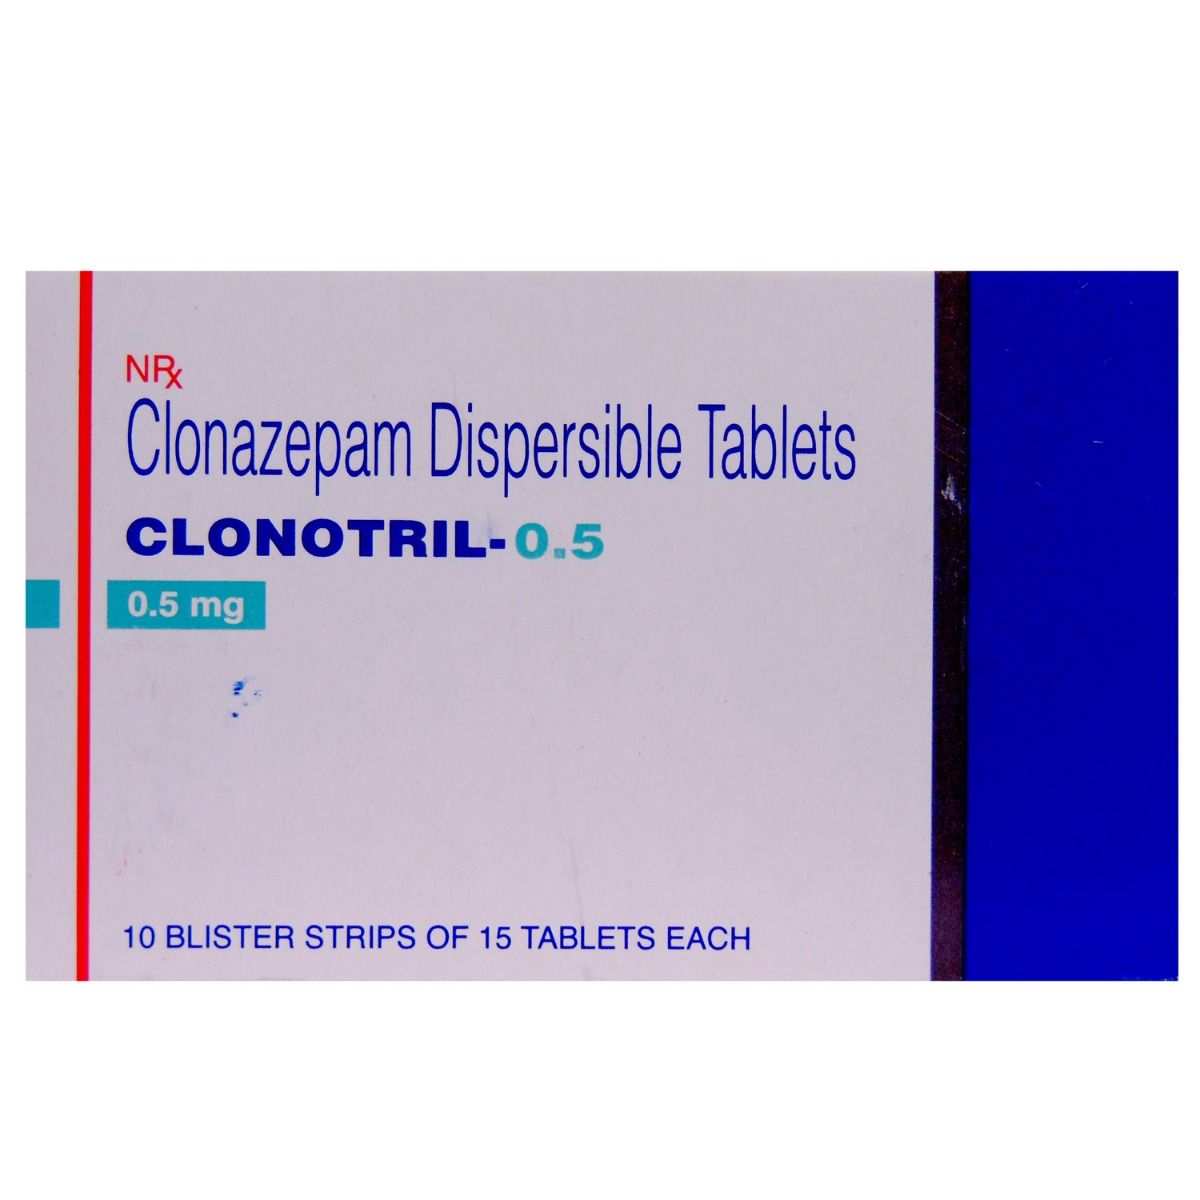 Clonotril 0.5 Tablet 15's Price, Uses, Side Effects, Composition